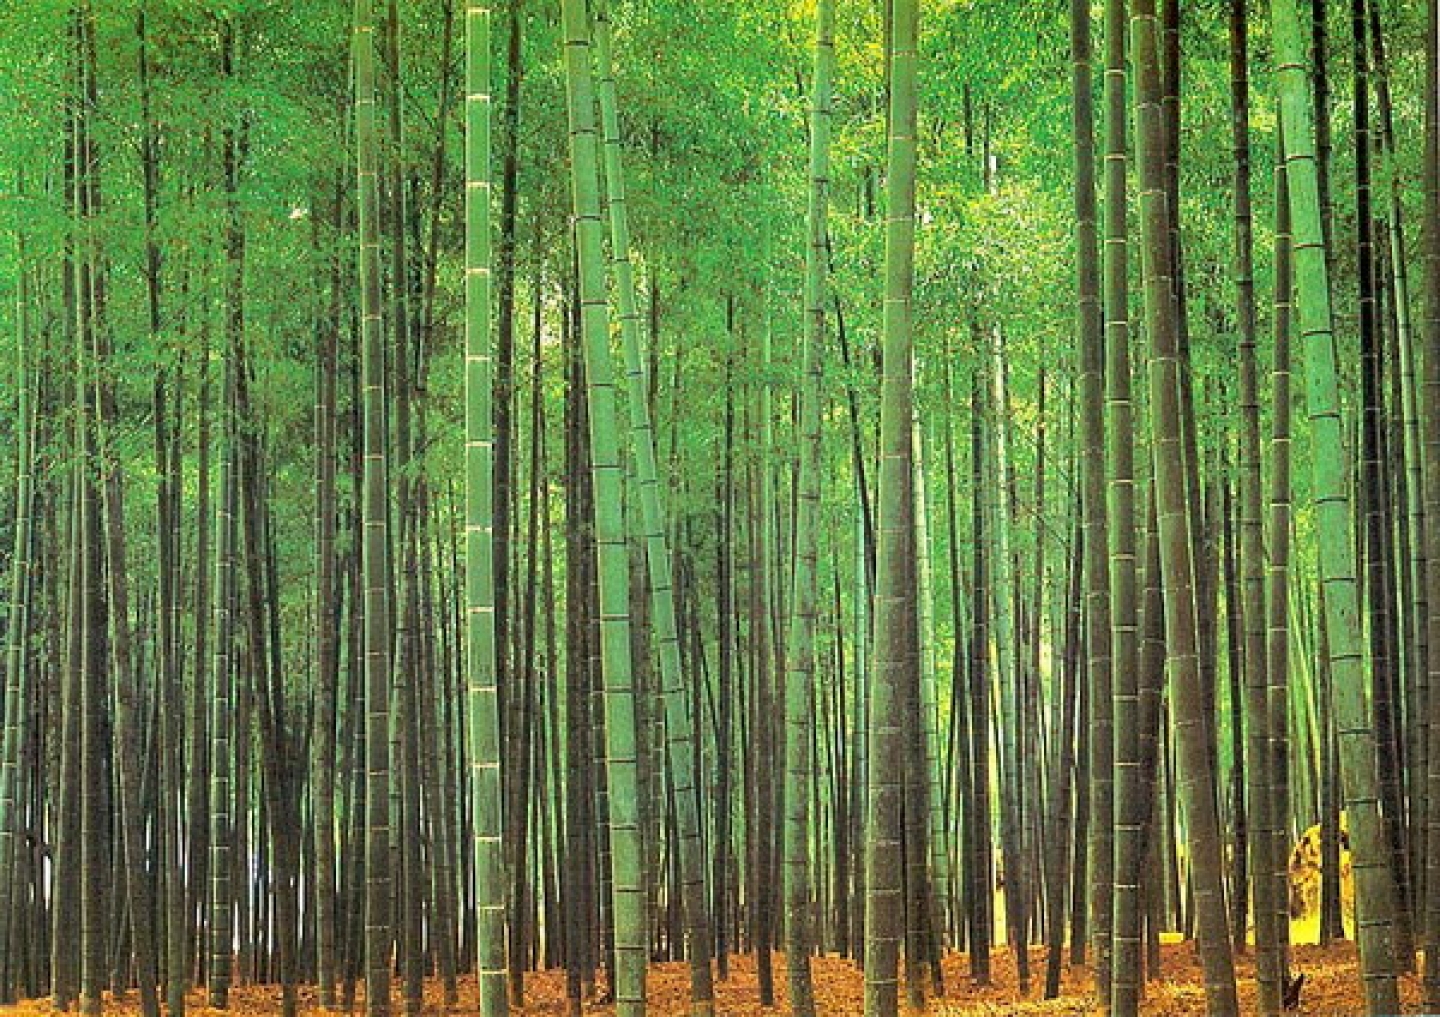 Bamboo Forest Wallpaper Pictures